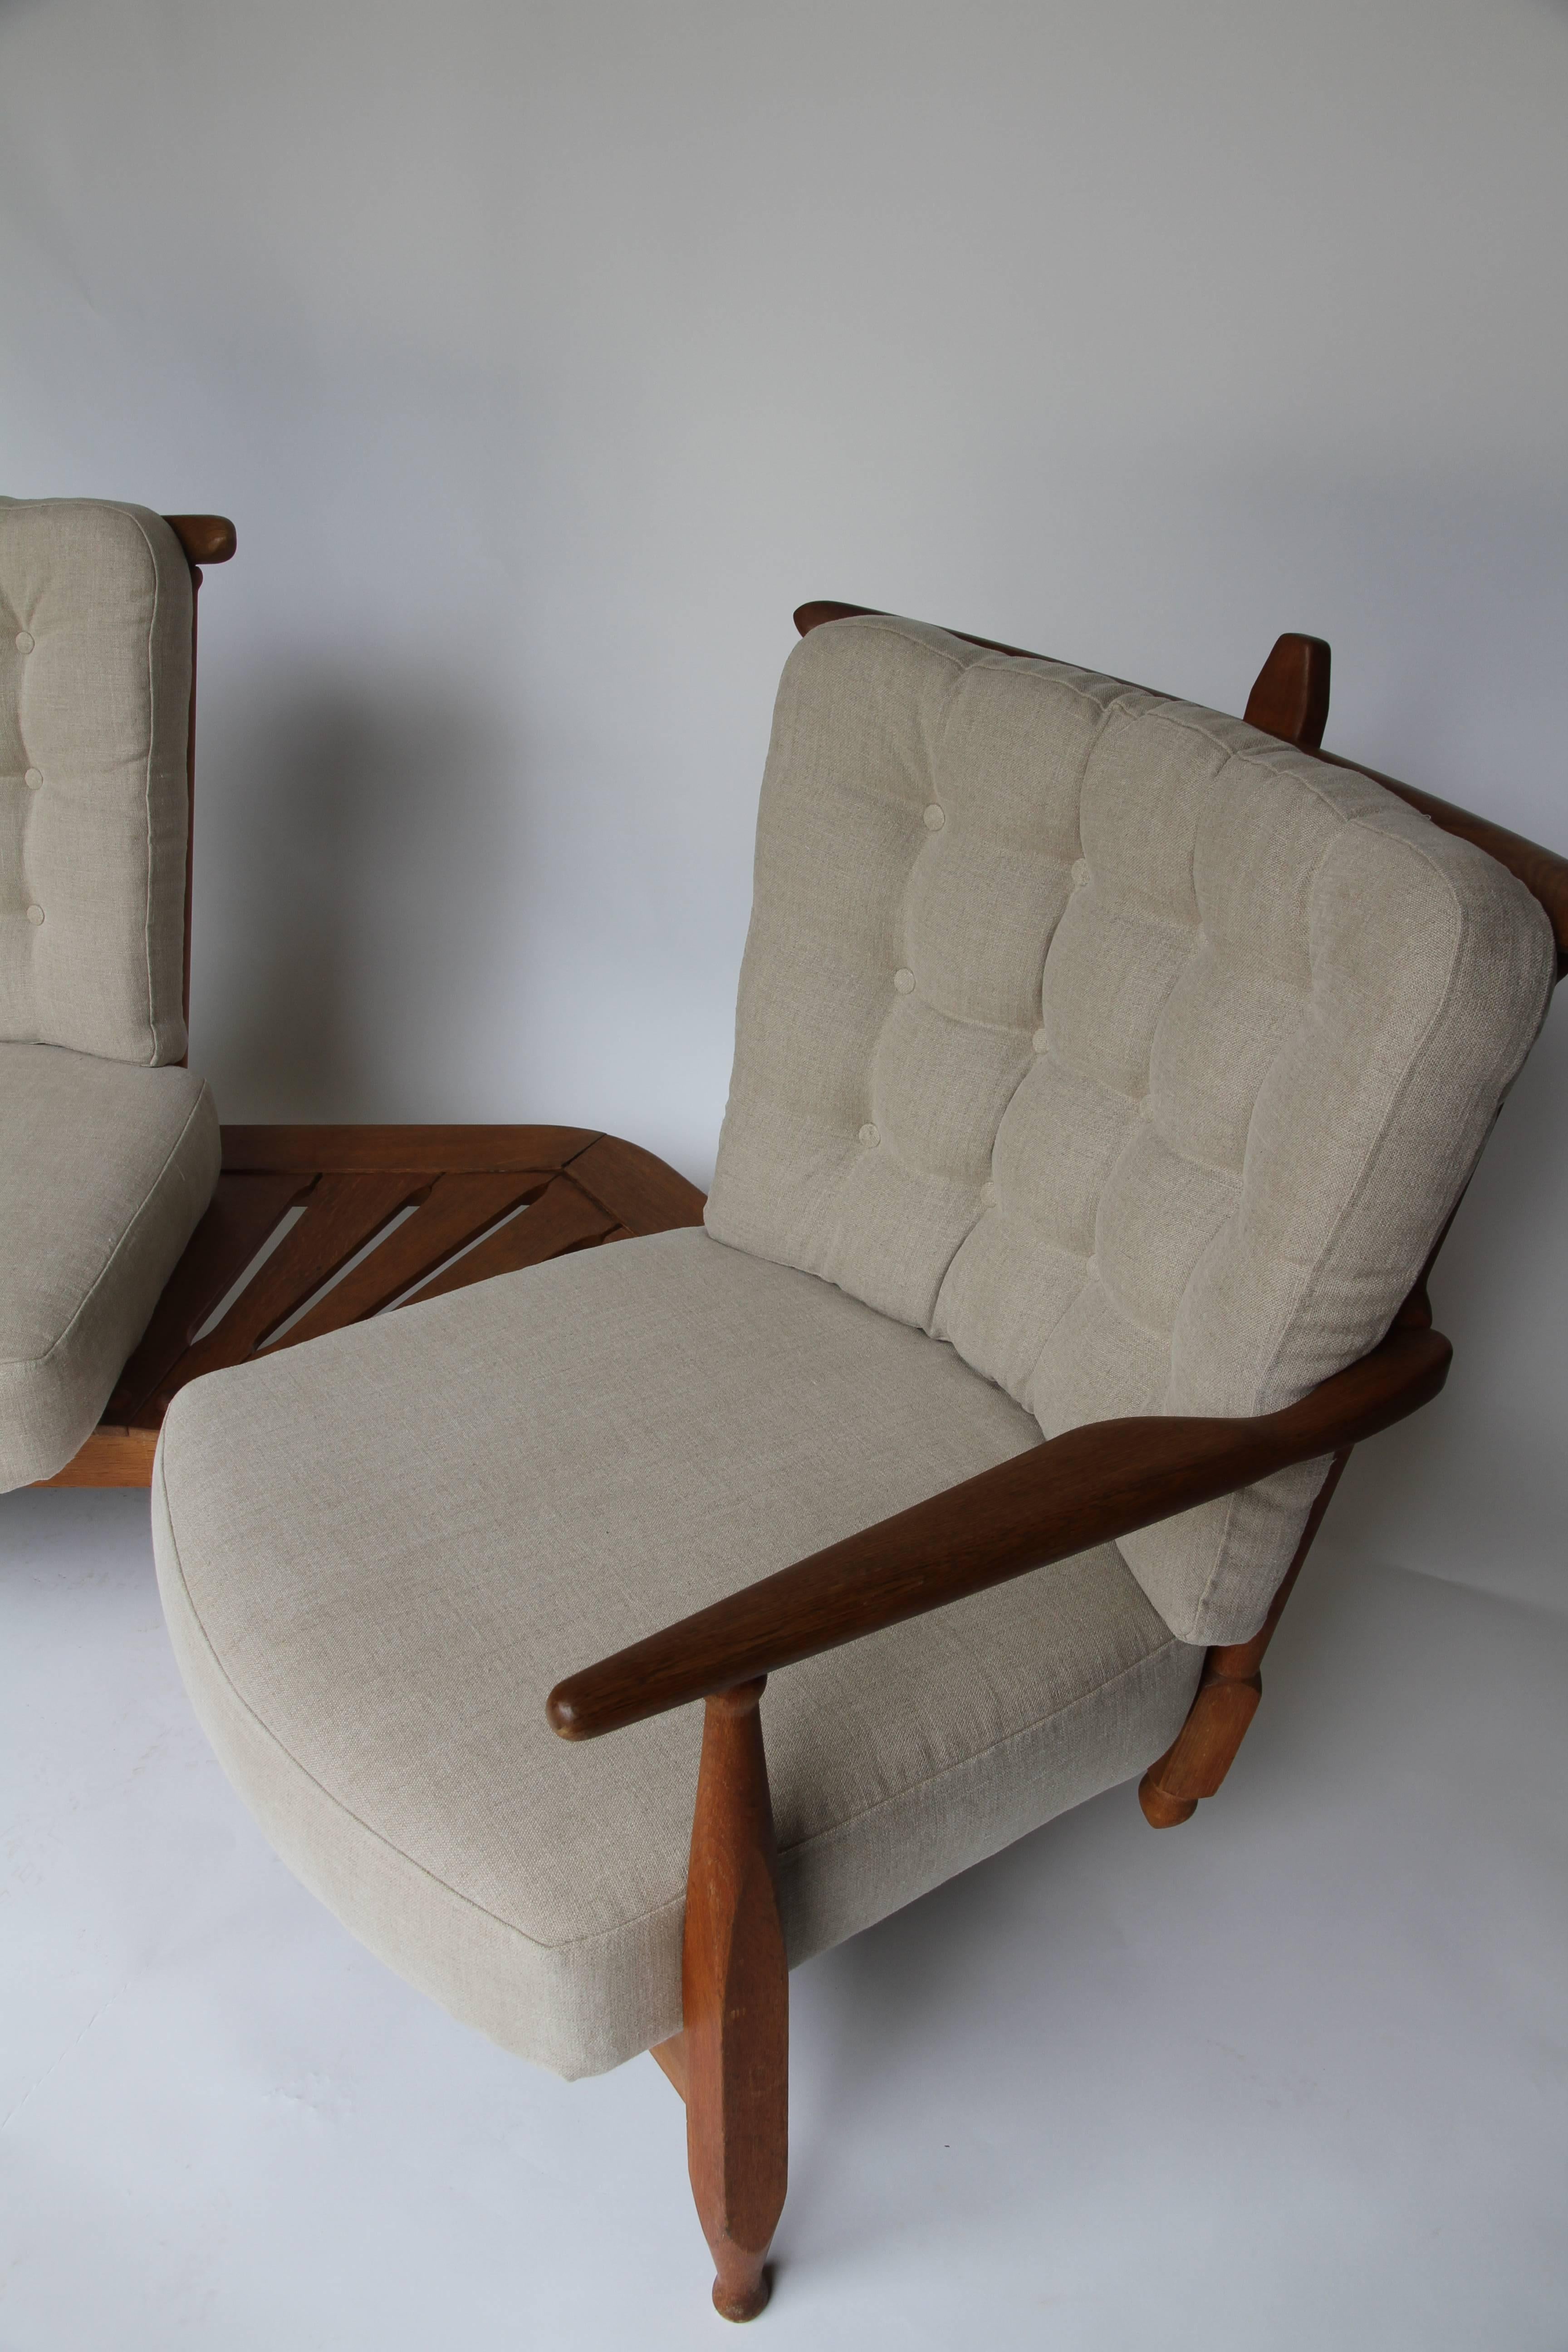 Guillerme et Chambron two-seat settee, two chairs connected with an oak table. The frame is very sculptural. The settee is newly upholstered in Liebco Belgian linen.
 